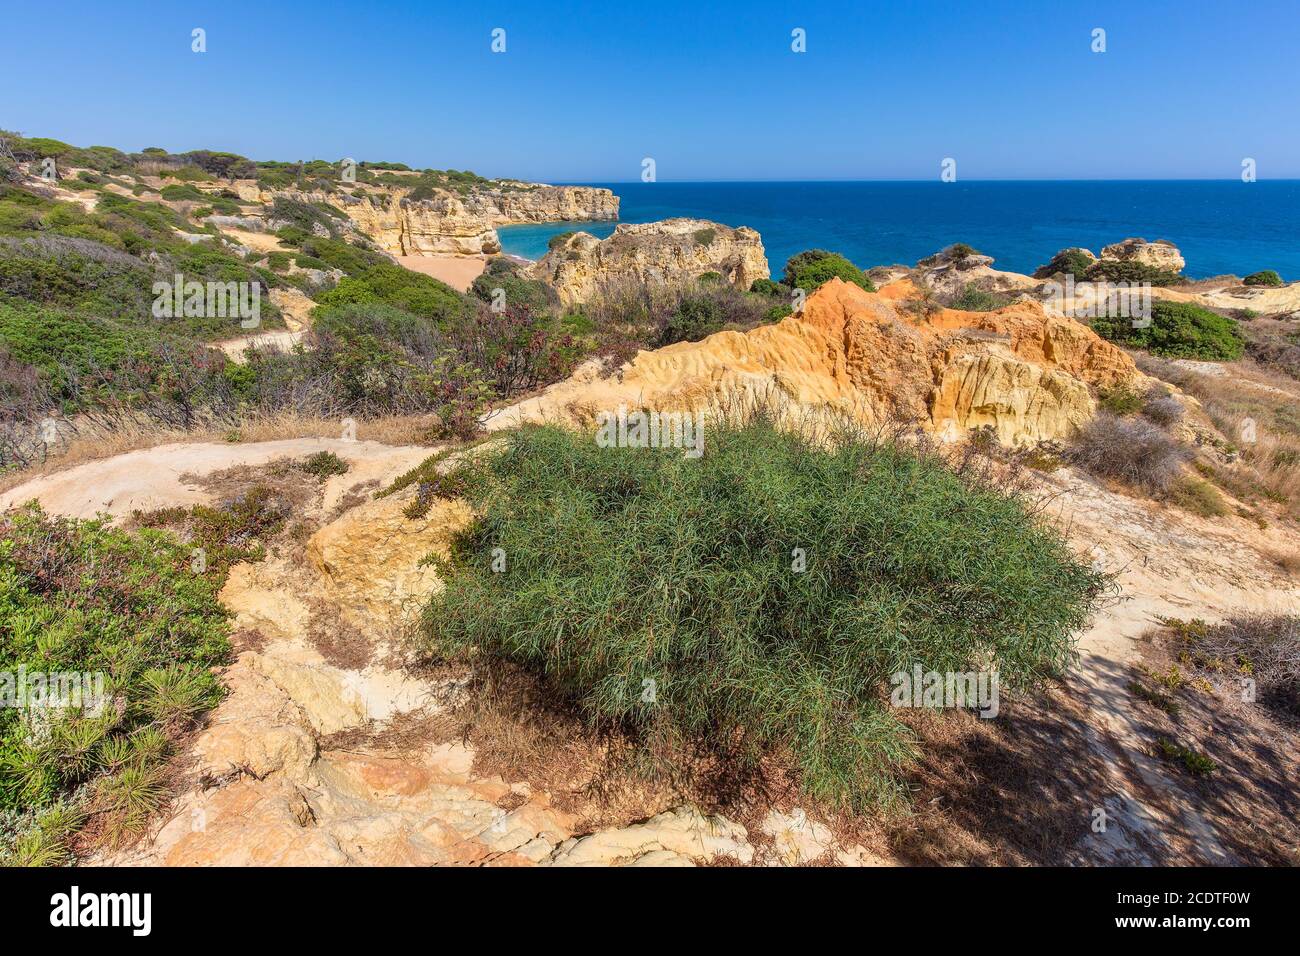 Rocky mountains and plants at portuguese coast Stock Photo